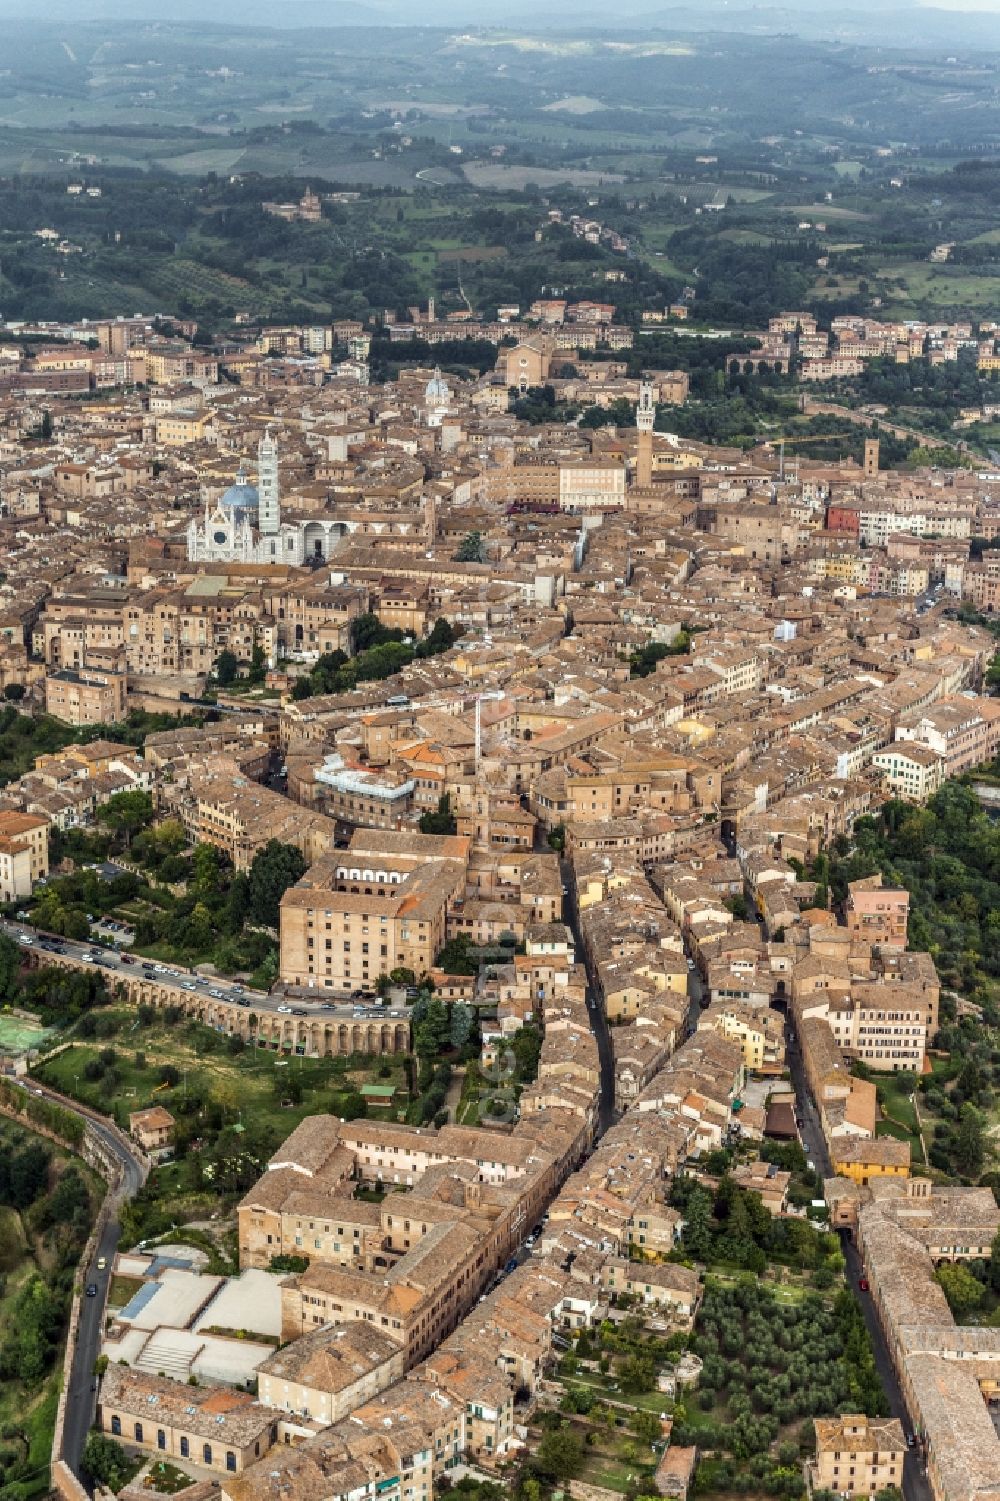 Aerial photograph Siena - City view of Siena in the homonymous province in Italy. Between various buildings, the Gothic cathedral and the Palazzo Publico is the Torre del Mangia